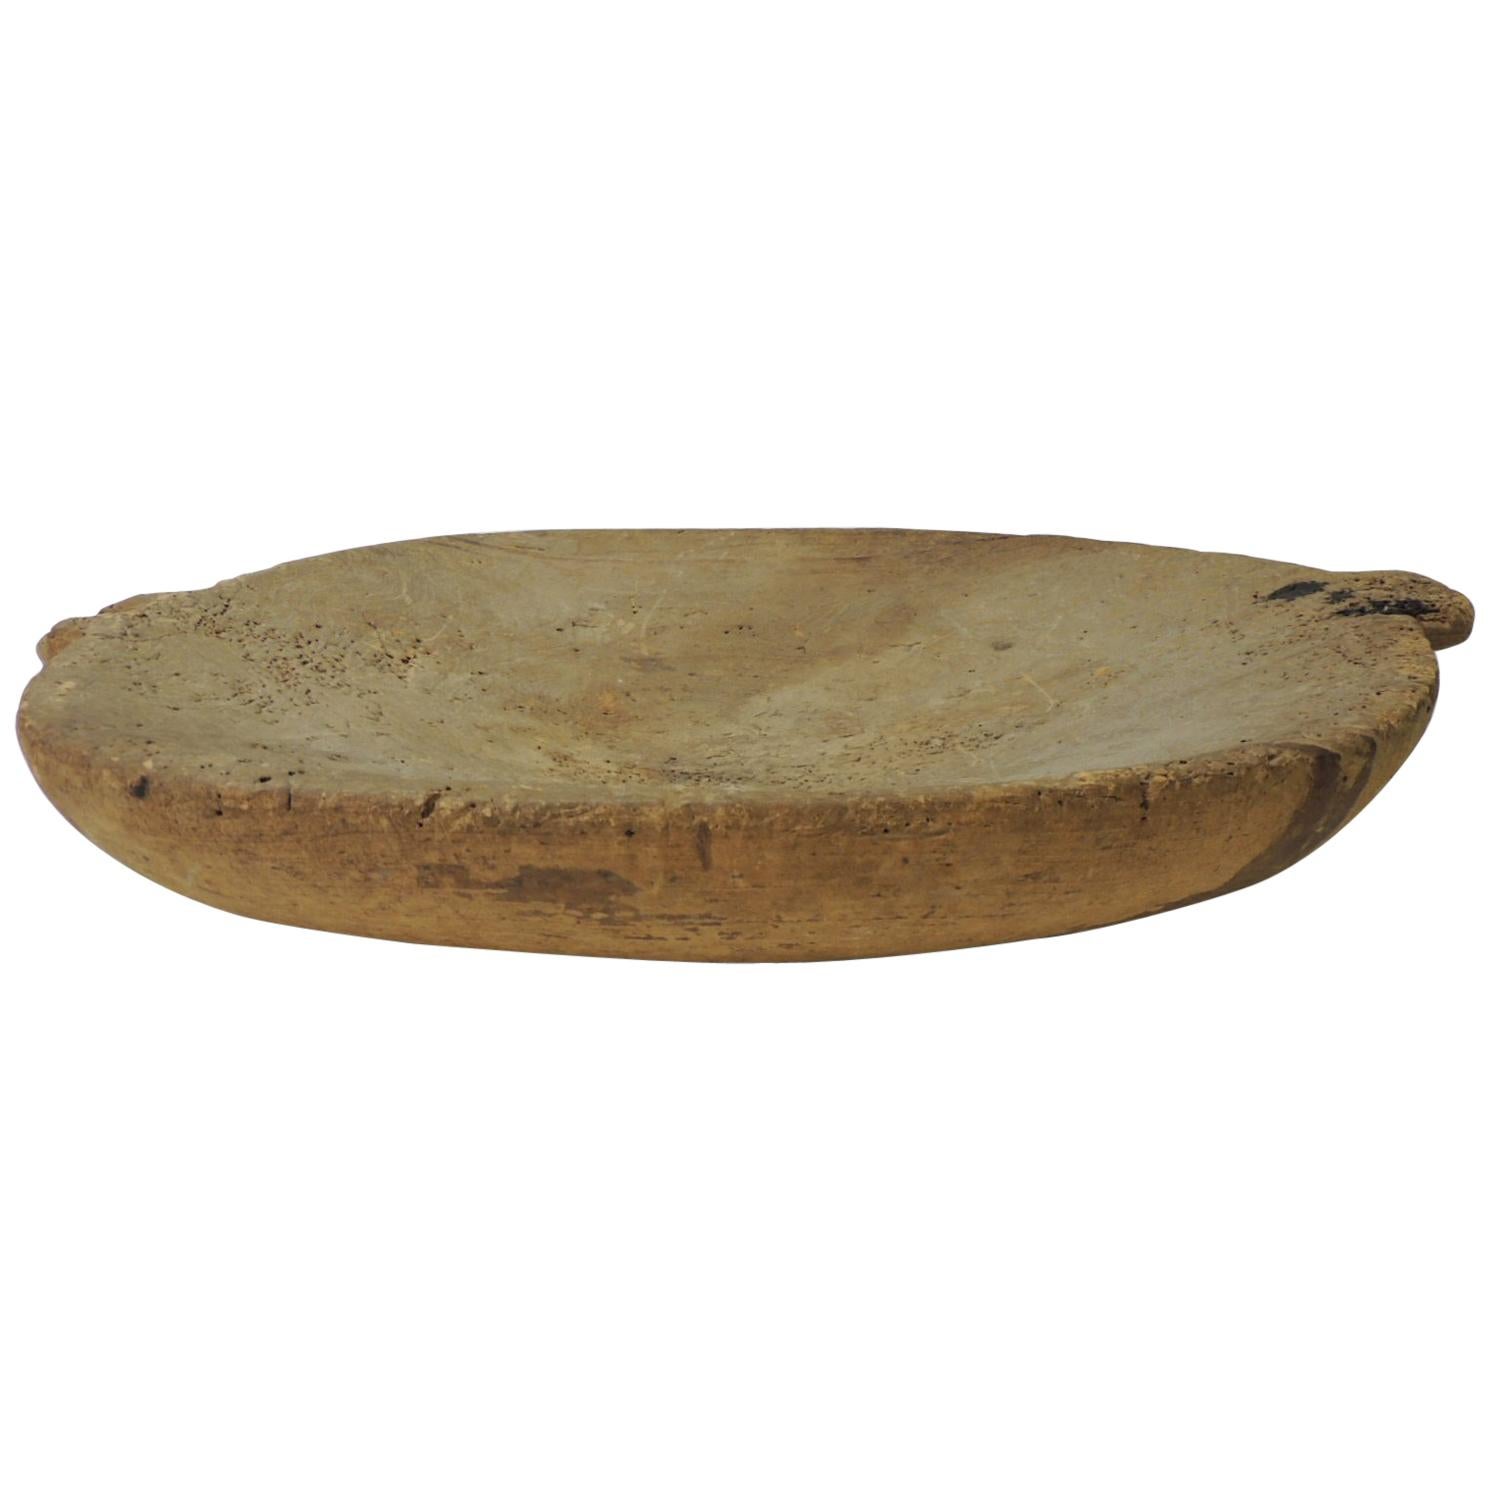 Rustic Large Scale Rustic Hand-Carved Solid Maple Wood Serving Bowl